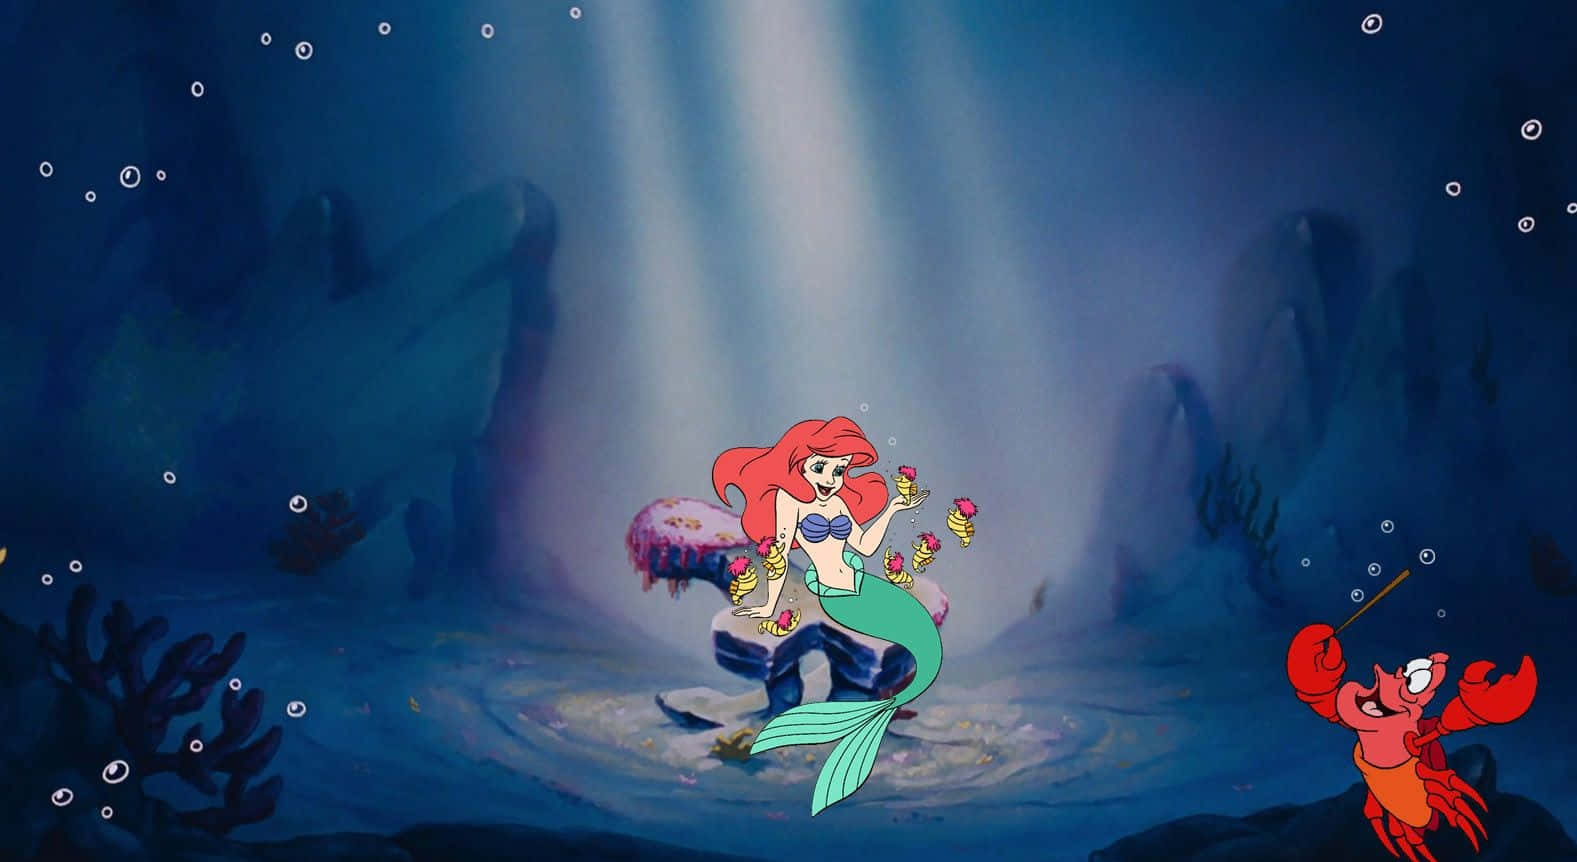 "Dive Into An Undersea Adventure with The Little Mermaid" Wallpaper